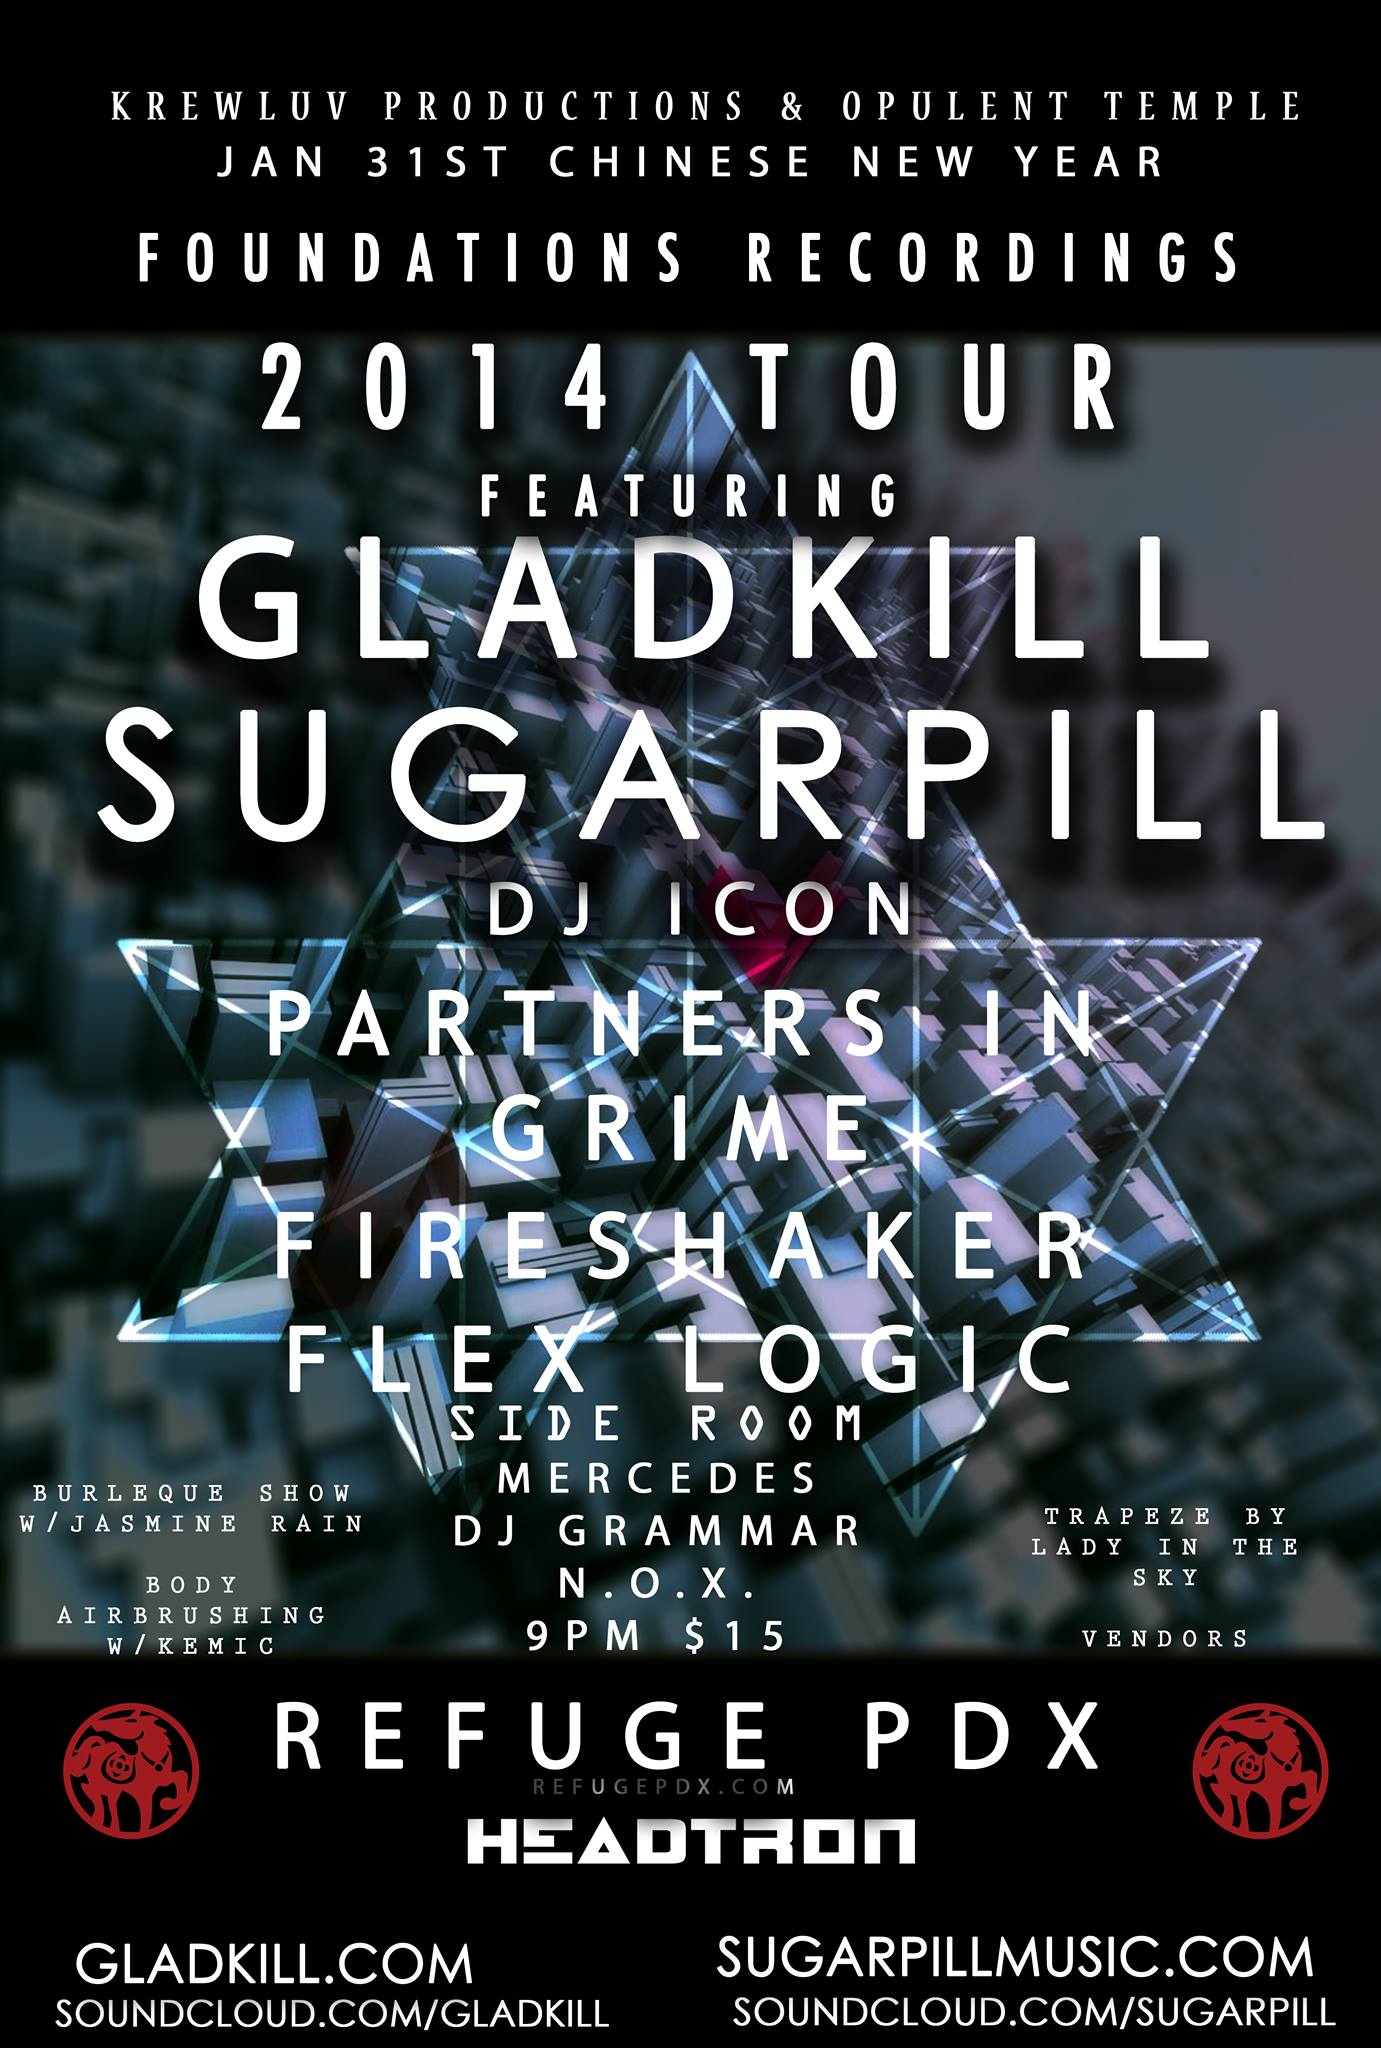 Krewluv & Opulent Temple presents: Year of the Horse Chinese New Year with GLADKILL, SUGARPILL, DJ ICON